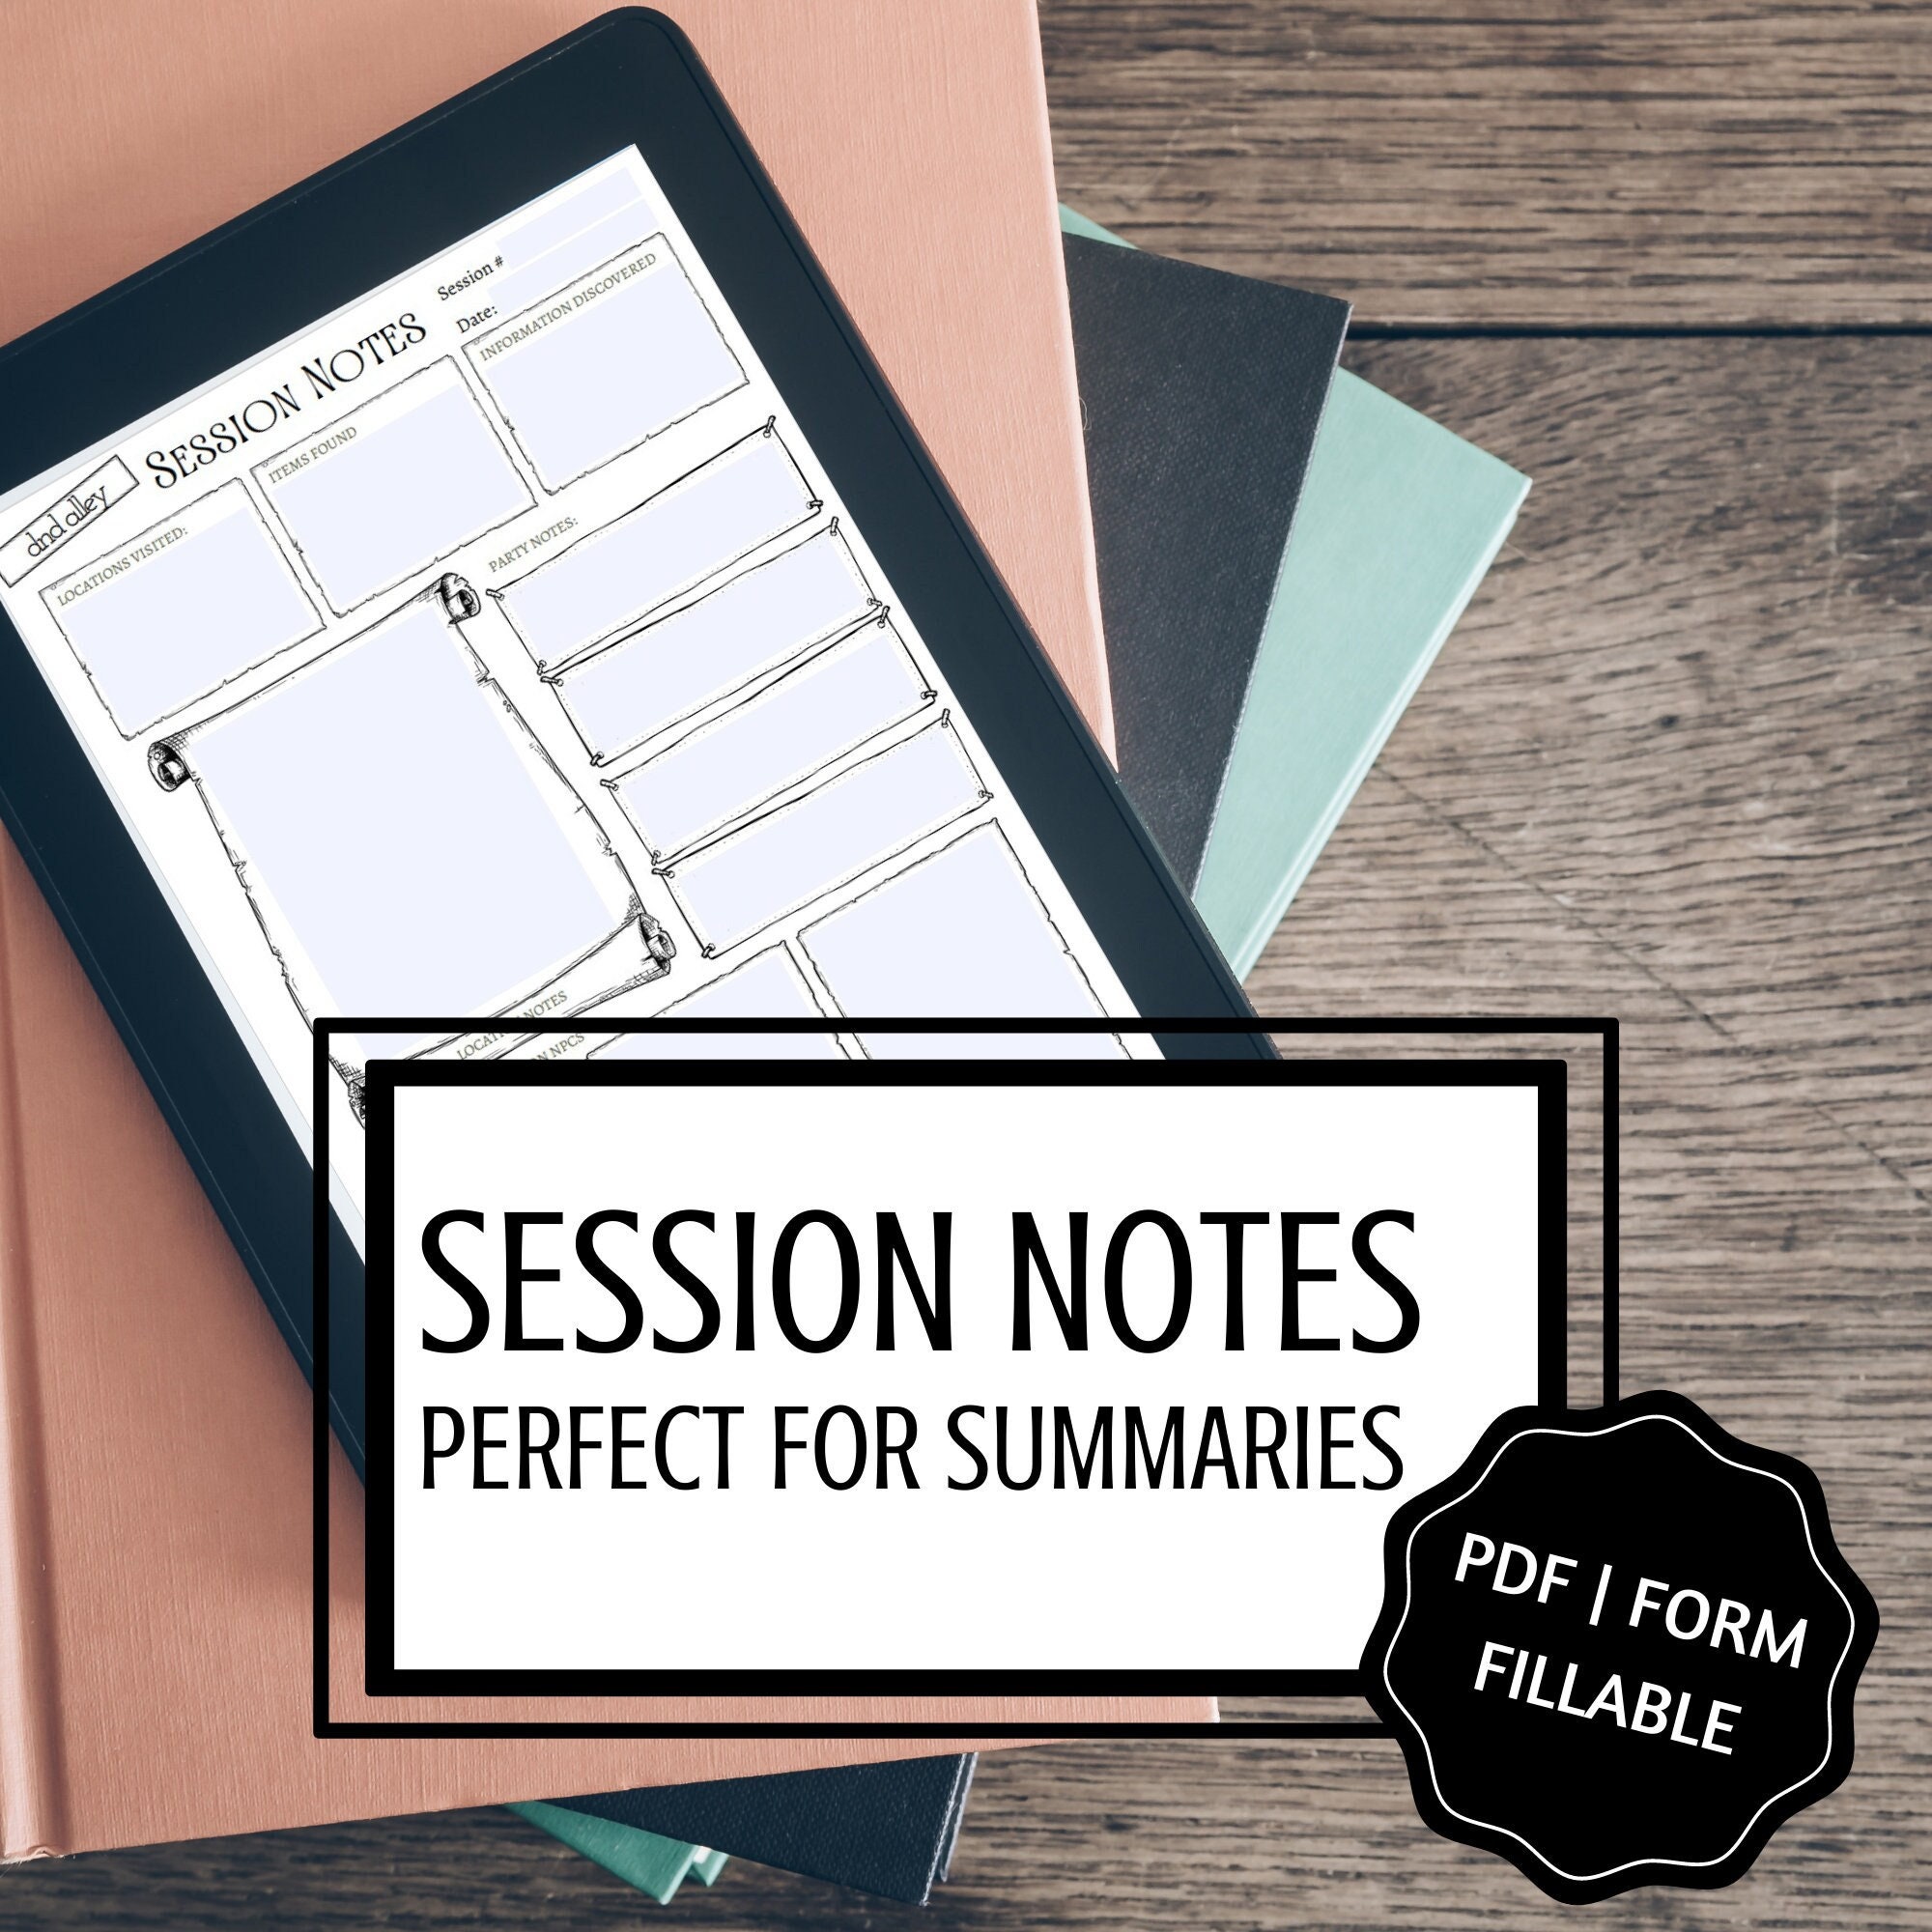 dnd-session-notes-form-fillable-perfect-for-session-etsy-hong-kong